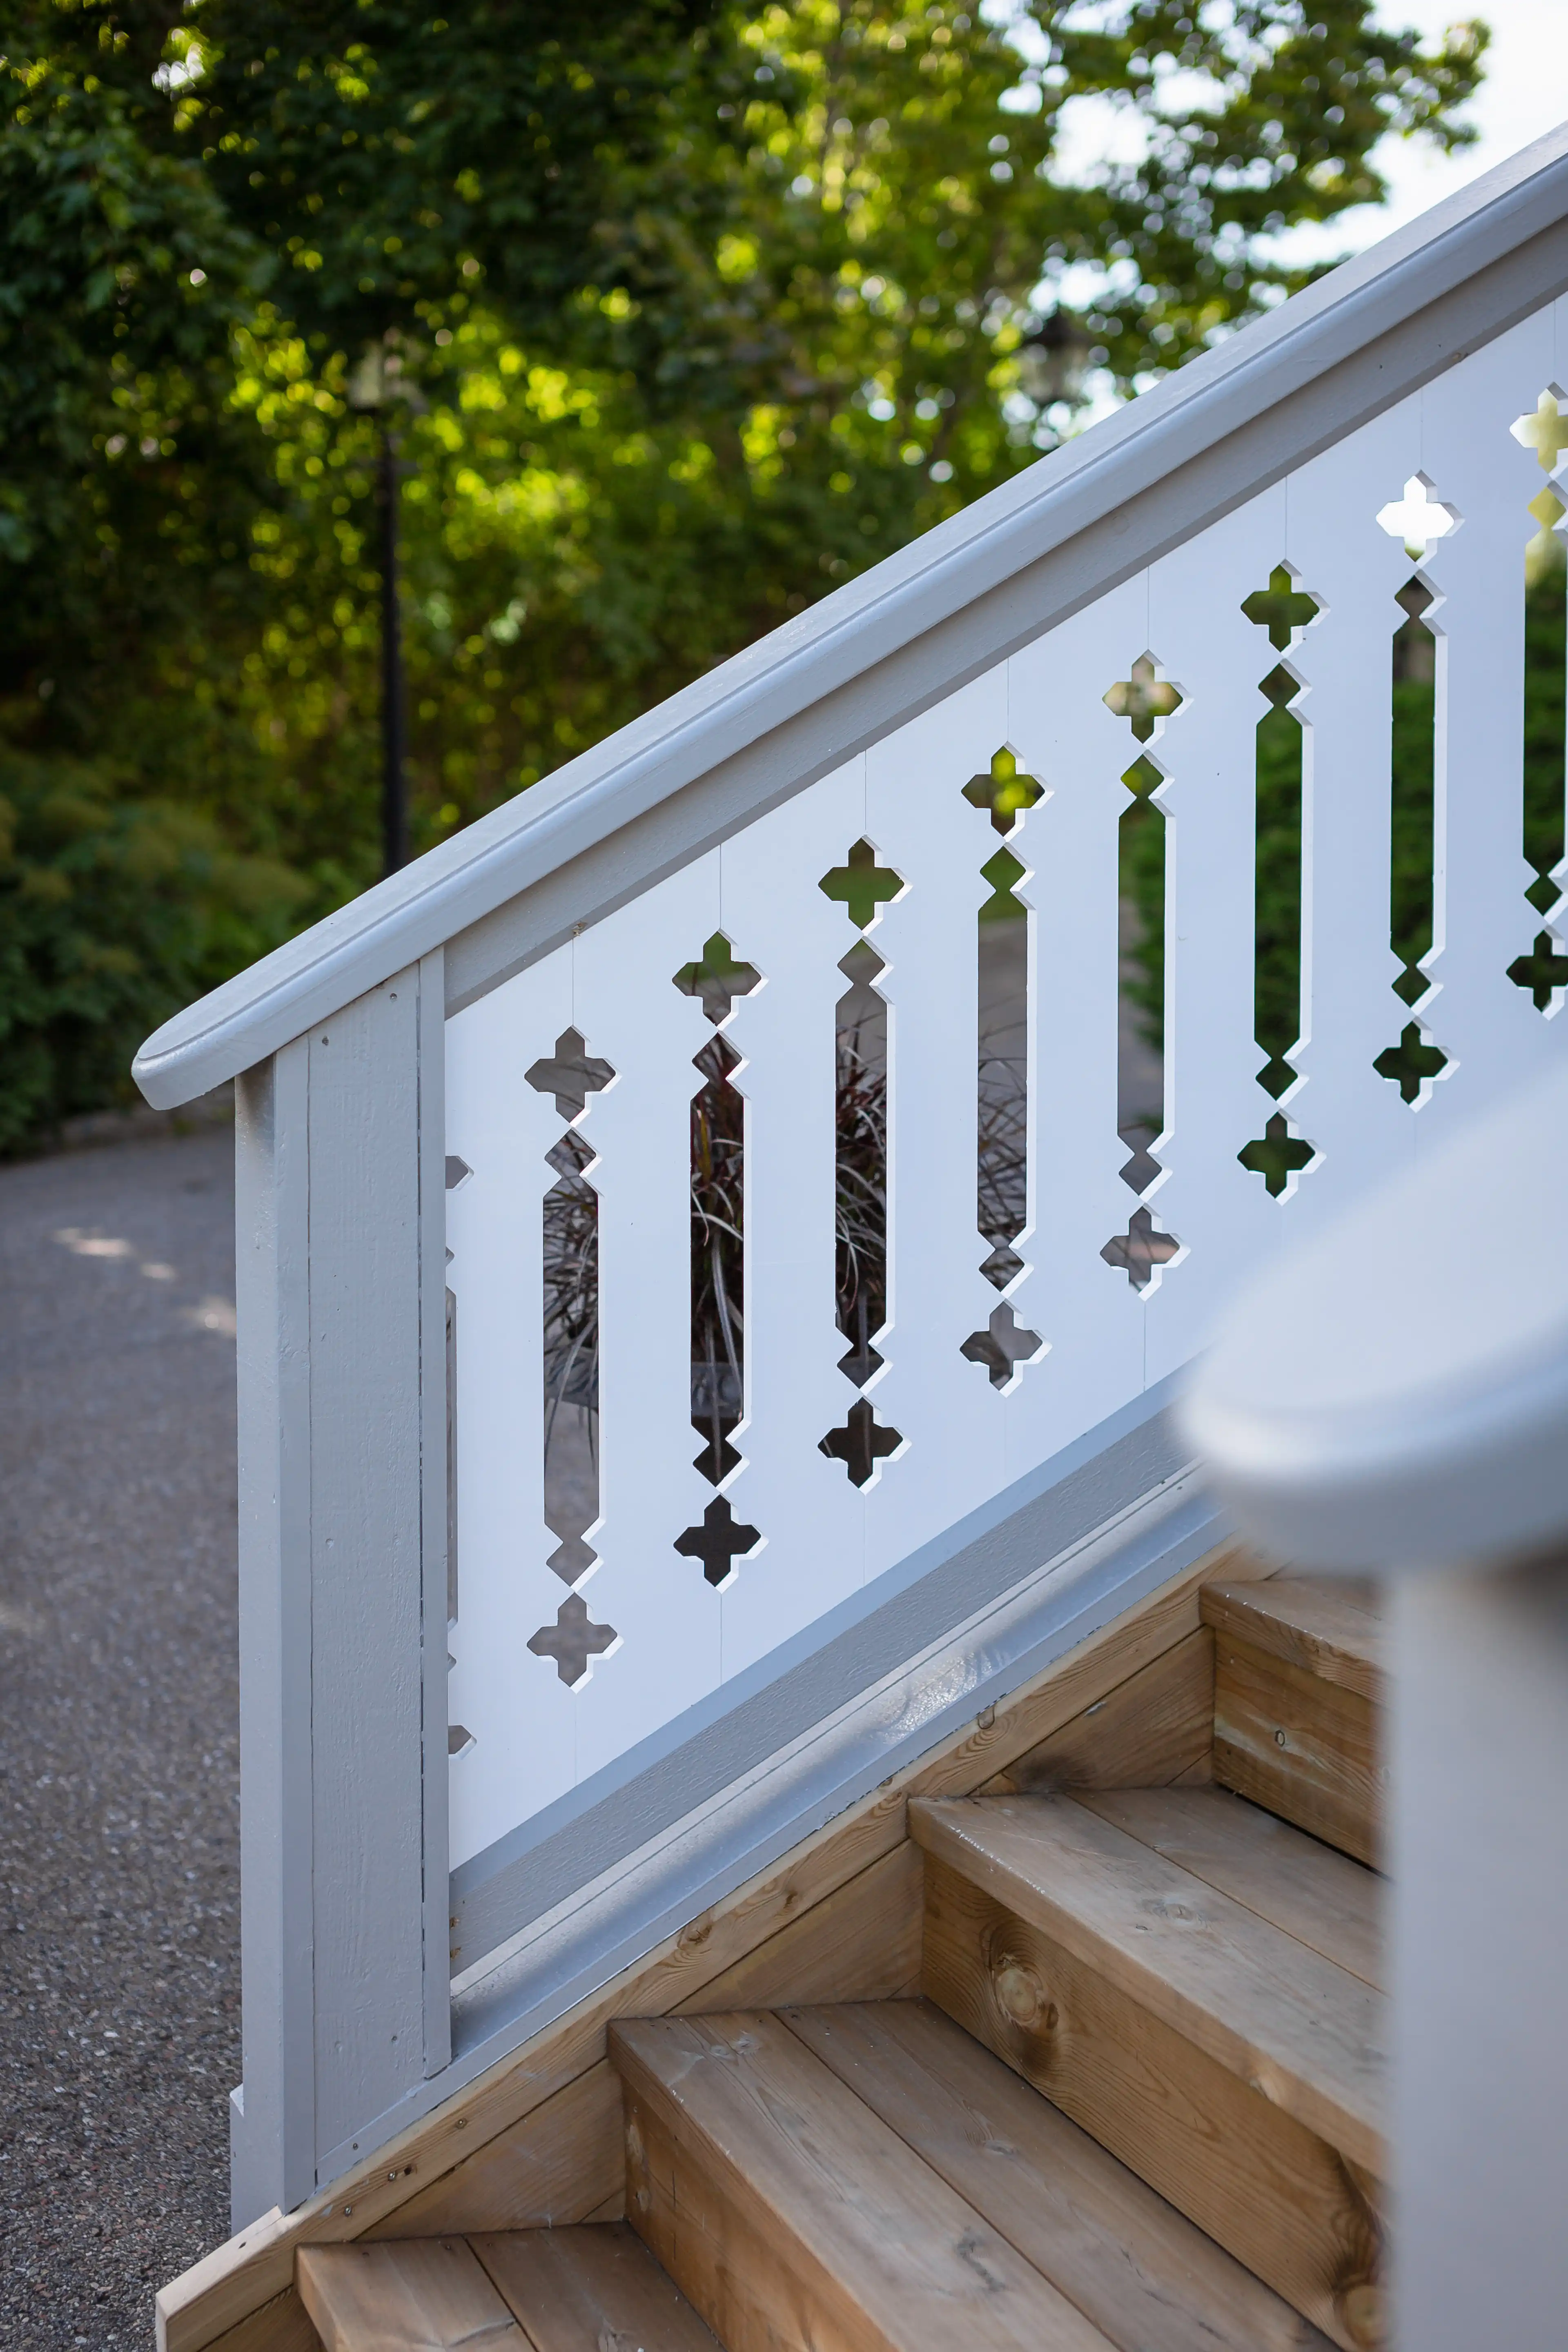 An elegant staircase leading to a porch with white-painted railings in turn-of-the-century and 19th-century style - vintage with a touch of rustic charm